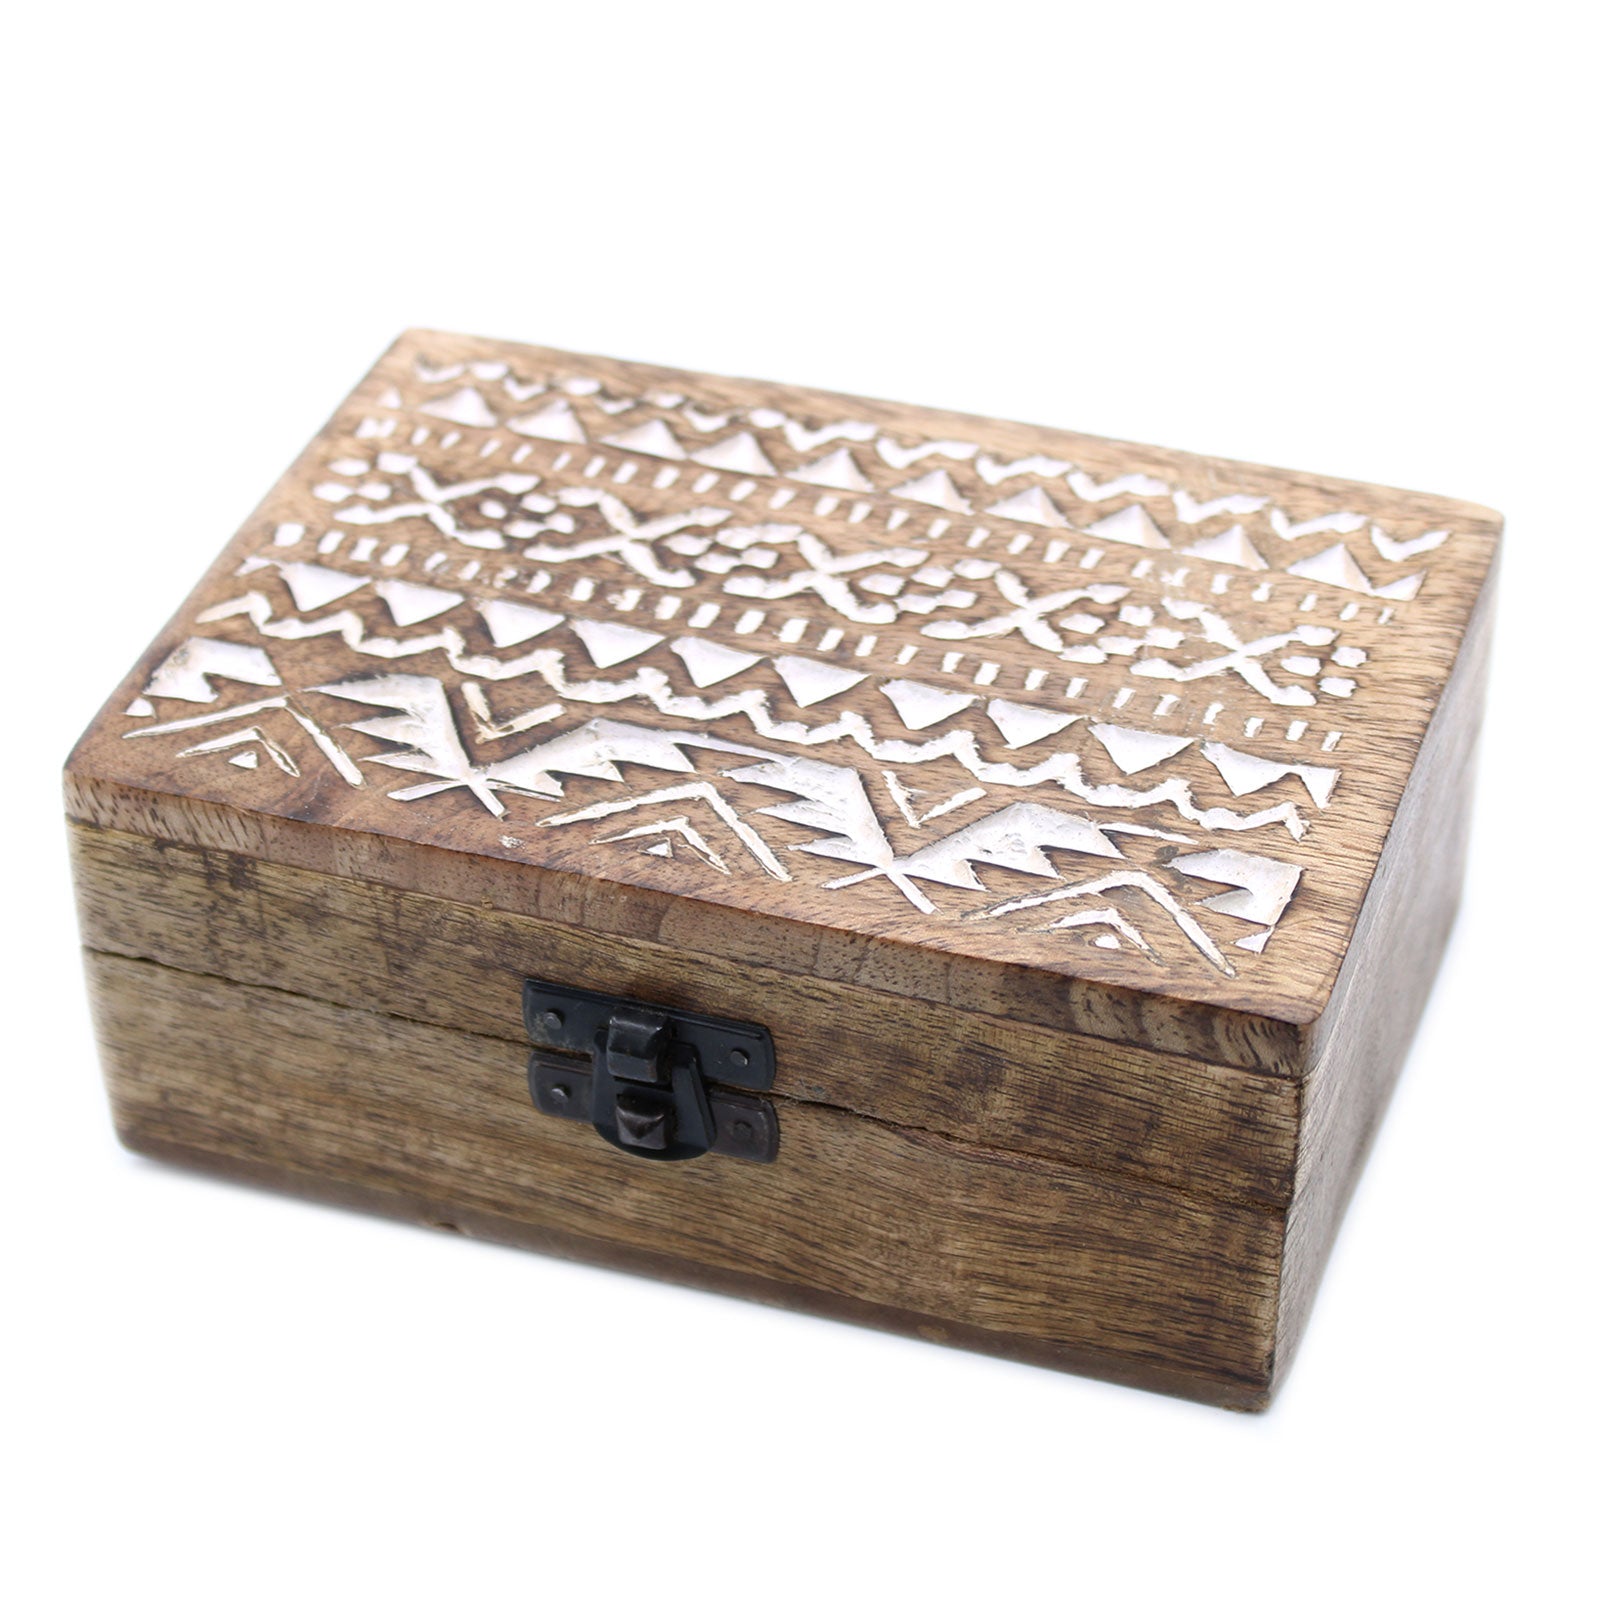 View White Washed Wooden Box 6x4 Slavic Design information